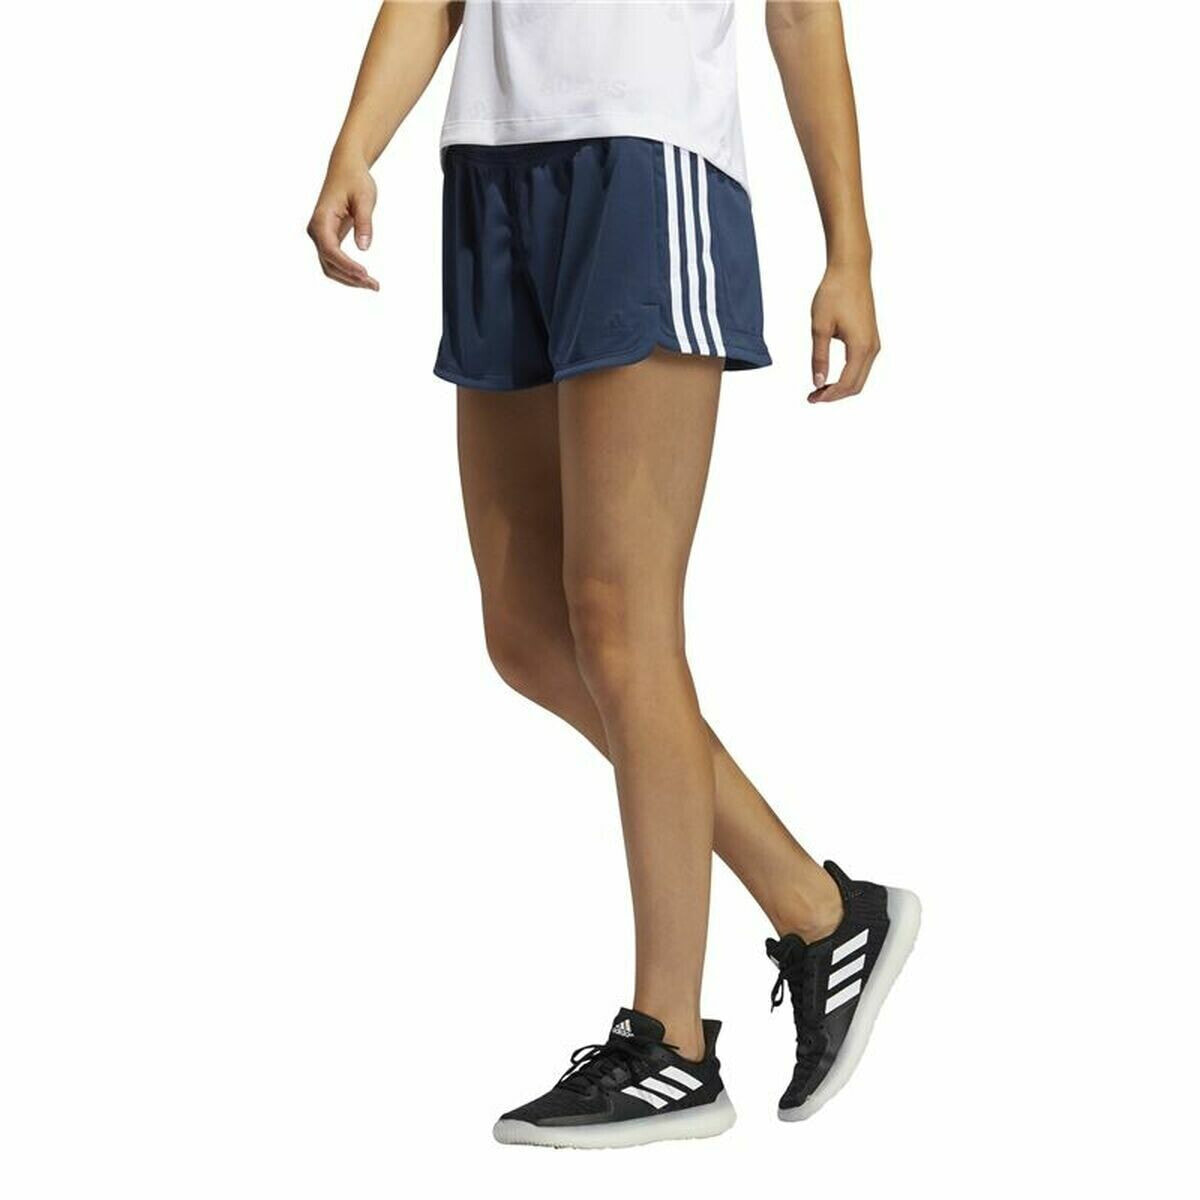 Sports Shorts for Women Adidas Knit Pacer 3 Stripes Dark blue Lady